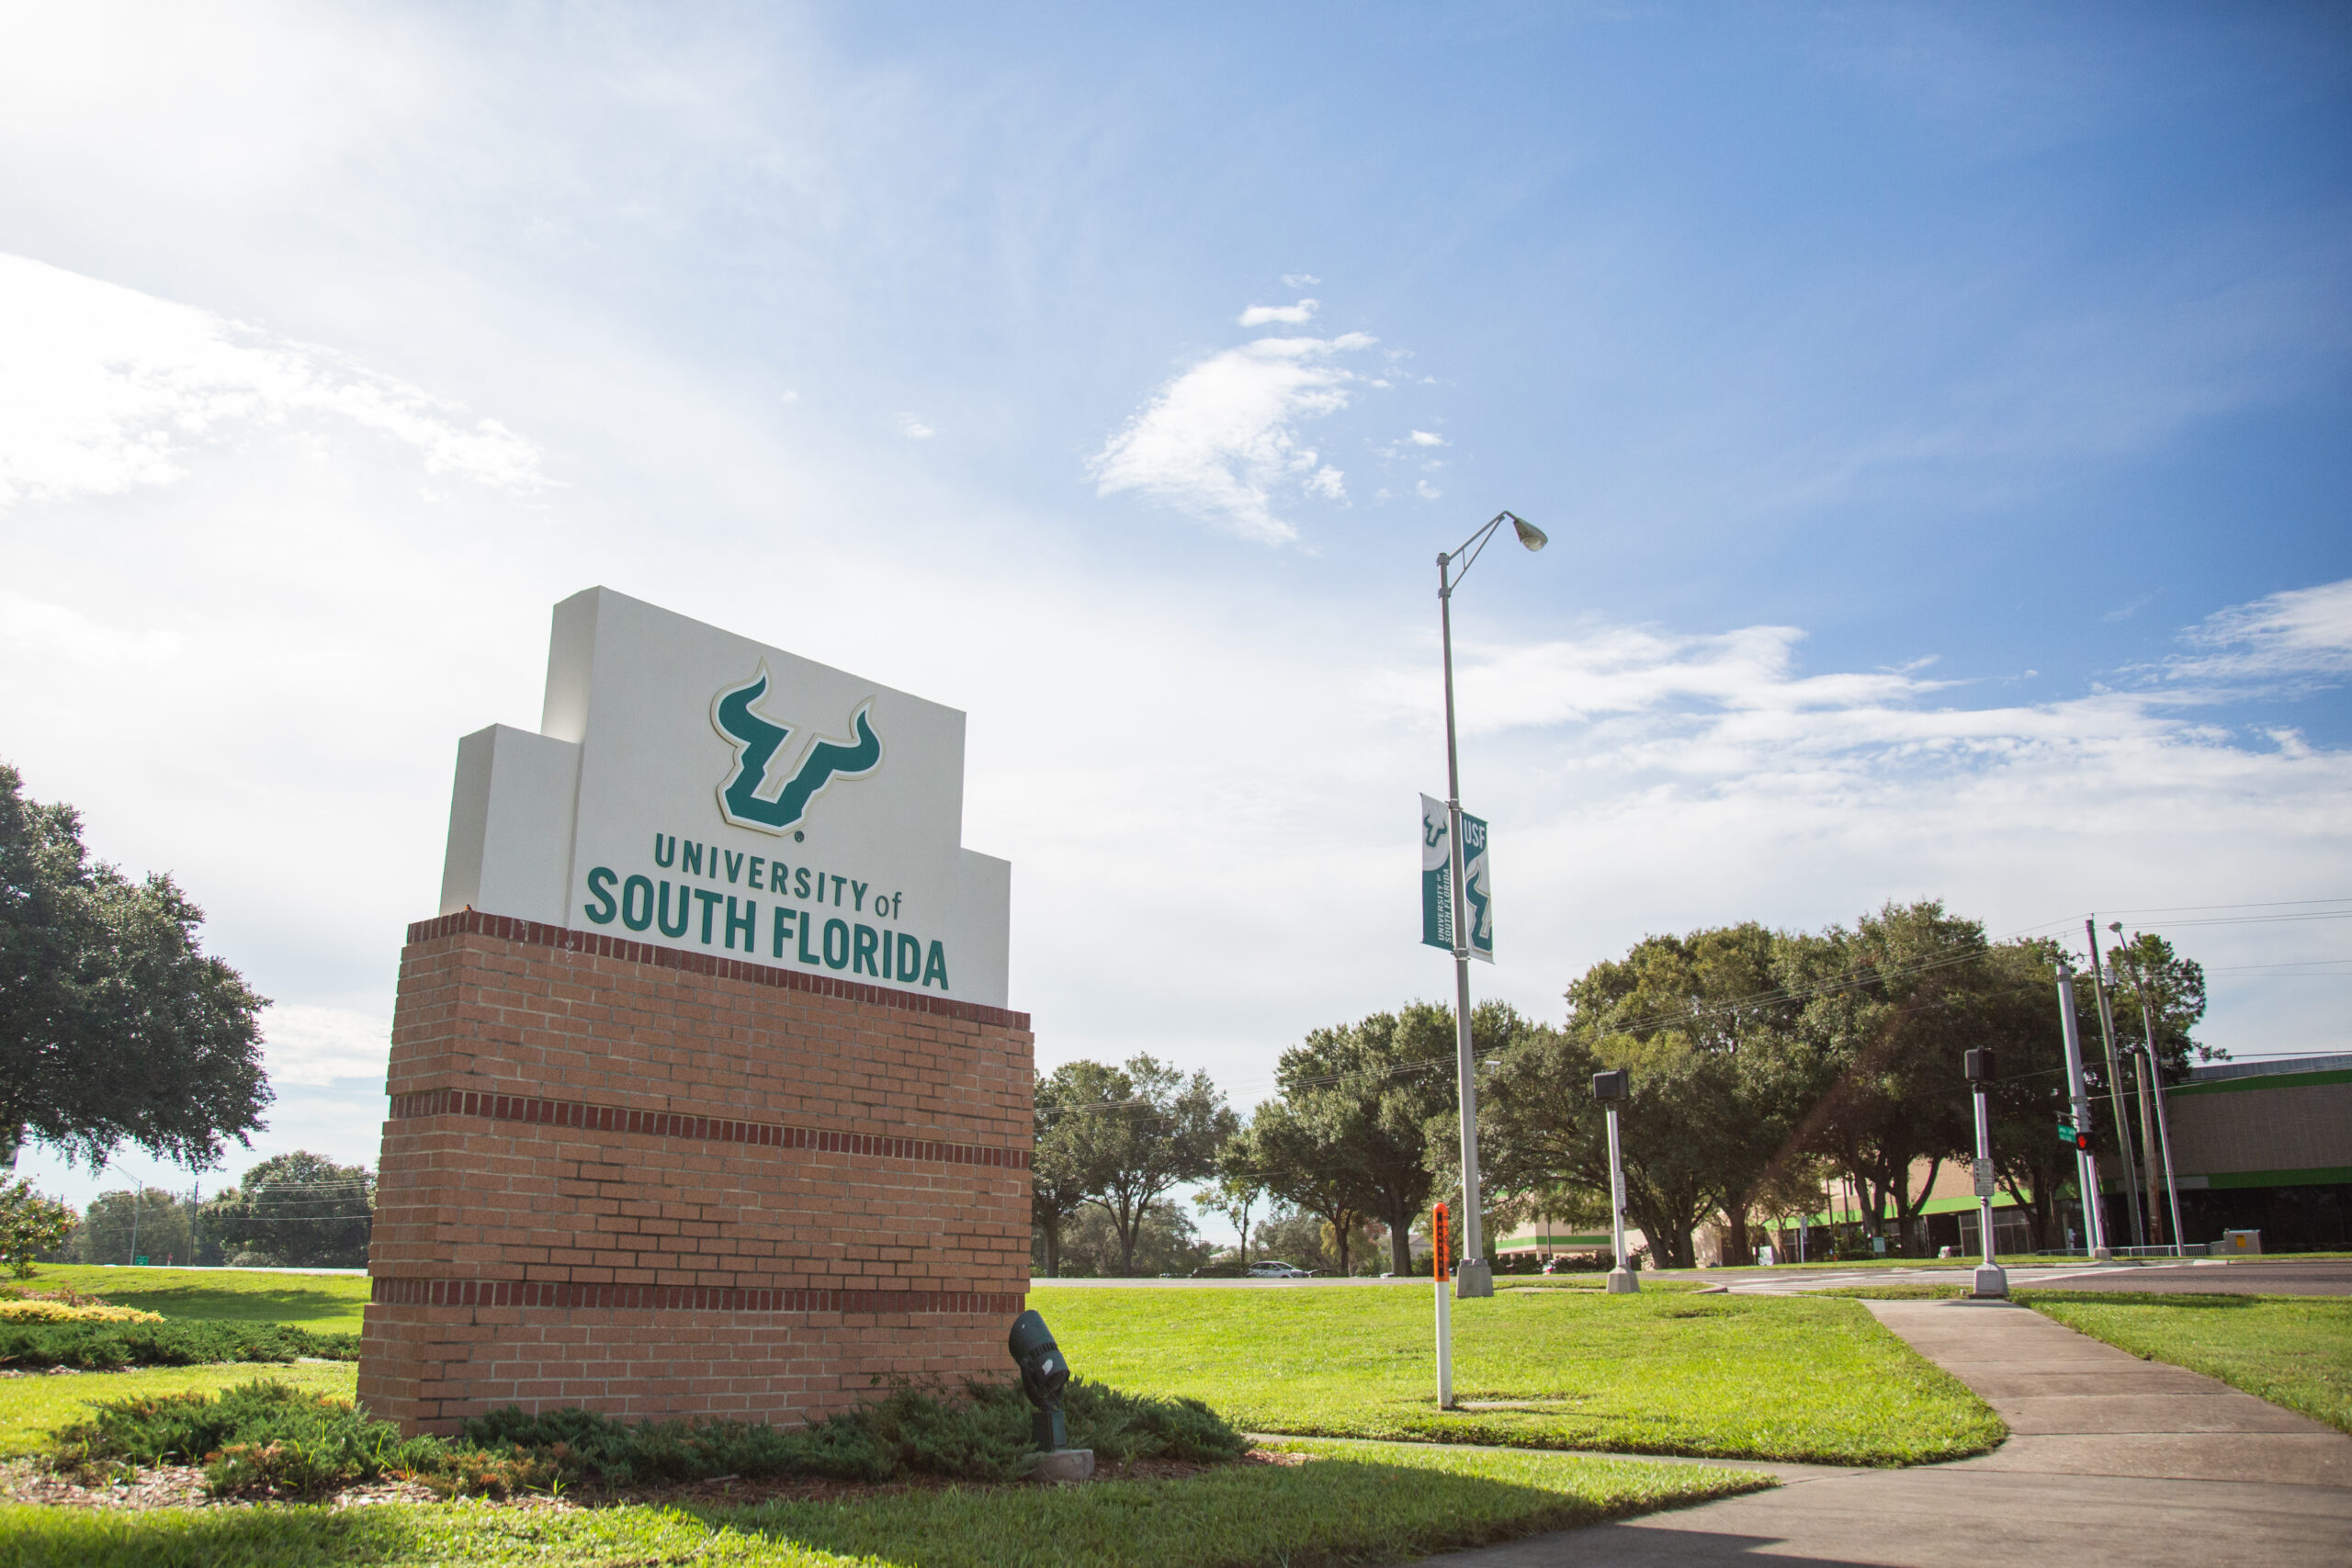 USF’s Asian student community reacts to recent attacks, calls for additional administrative support